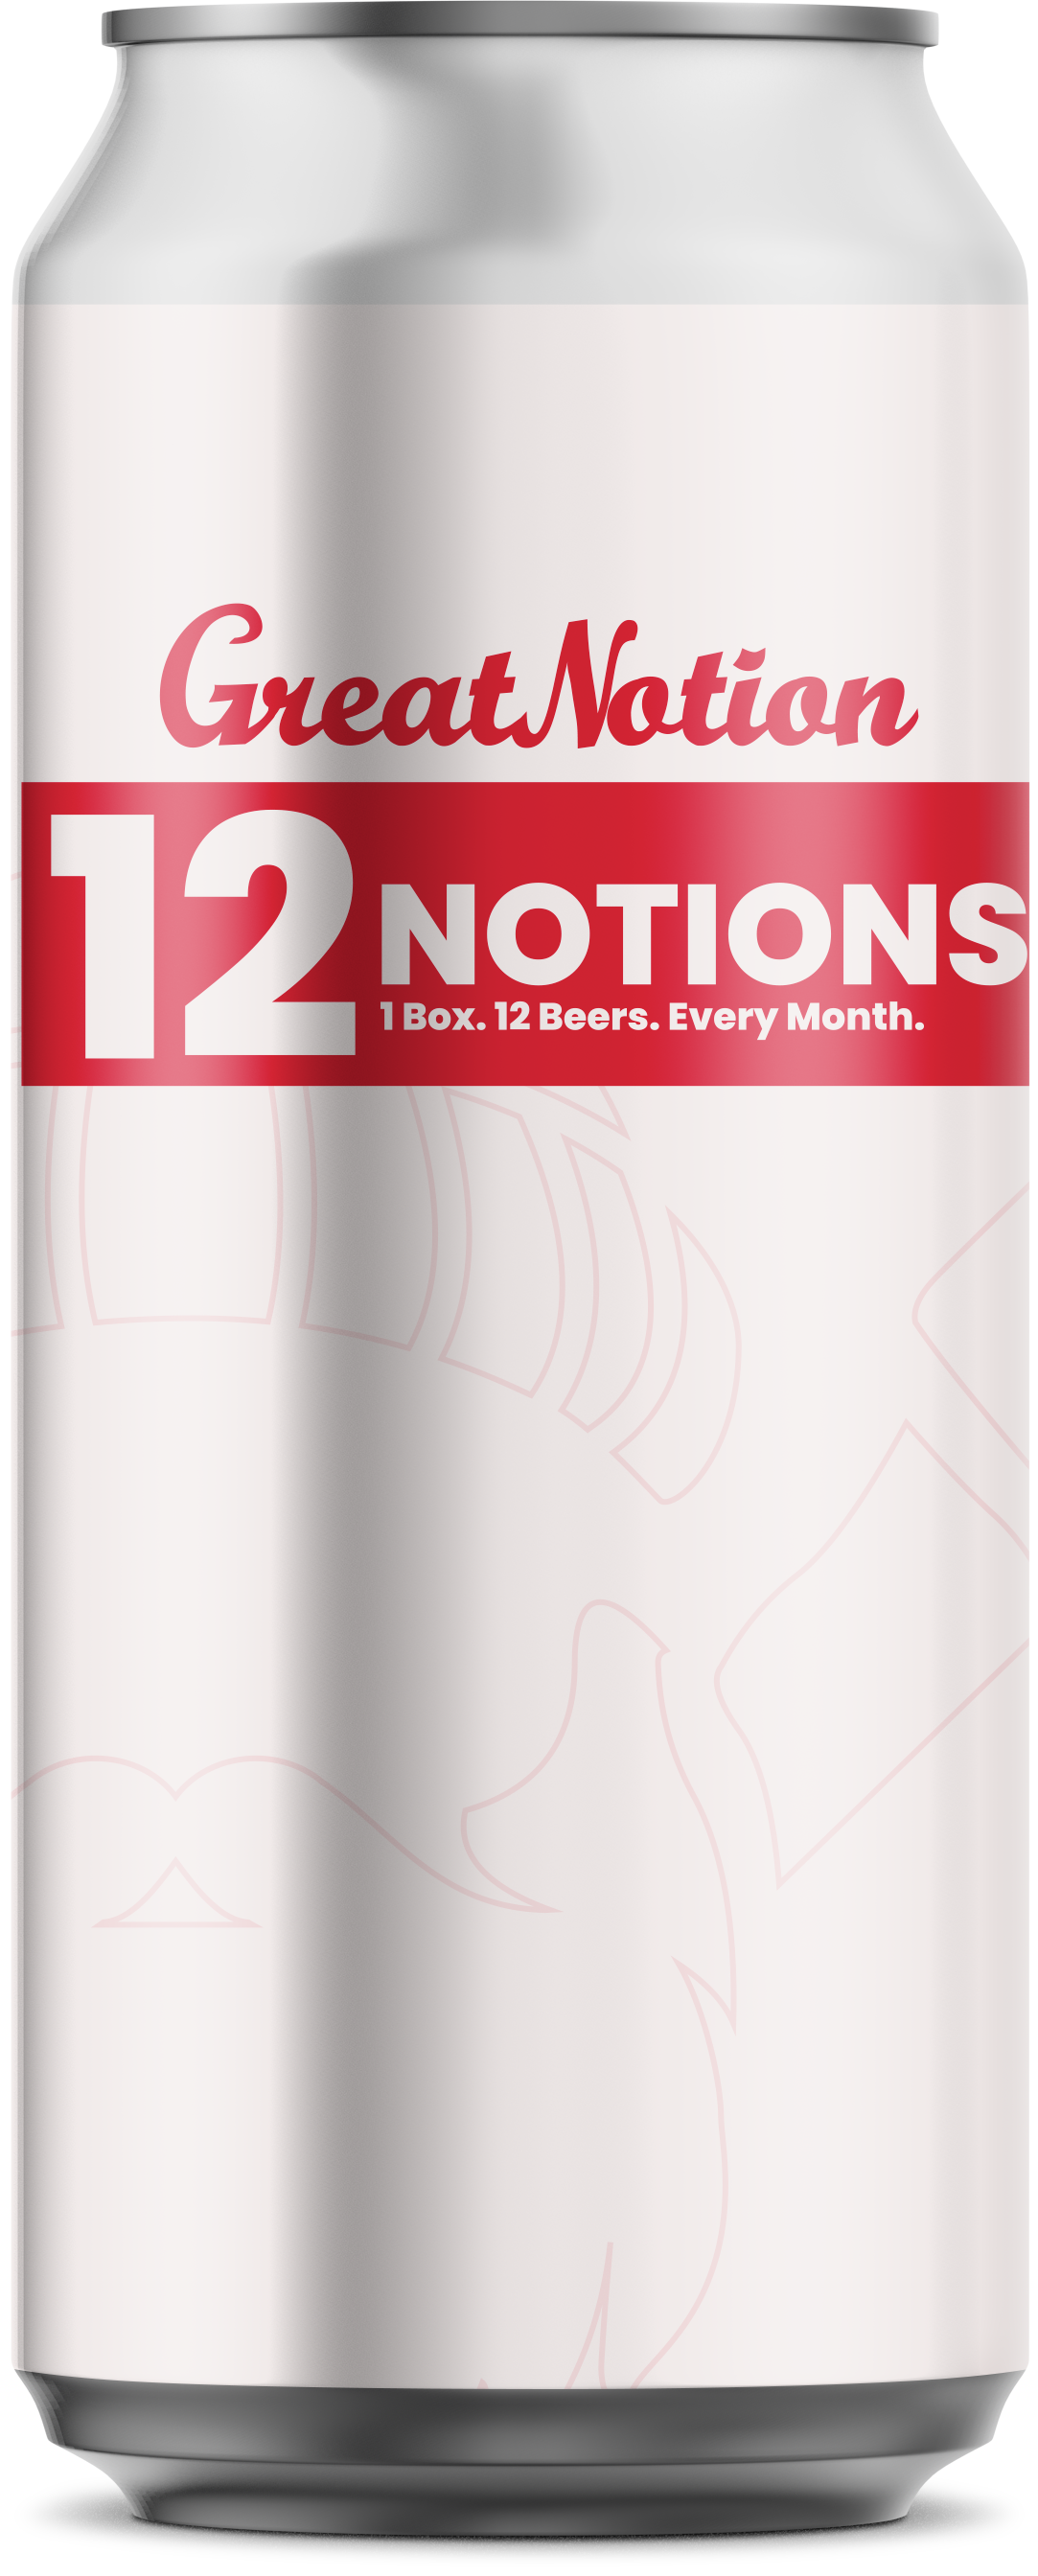 12 Notions - March